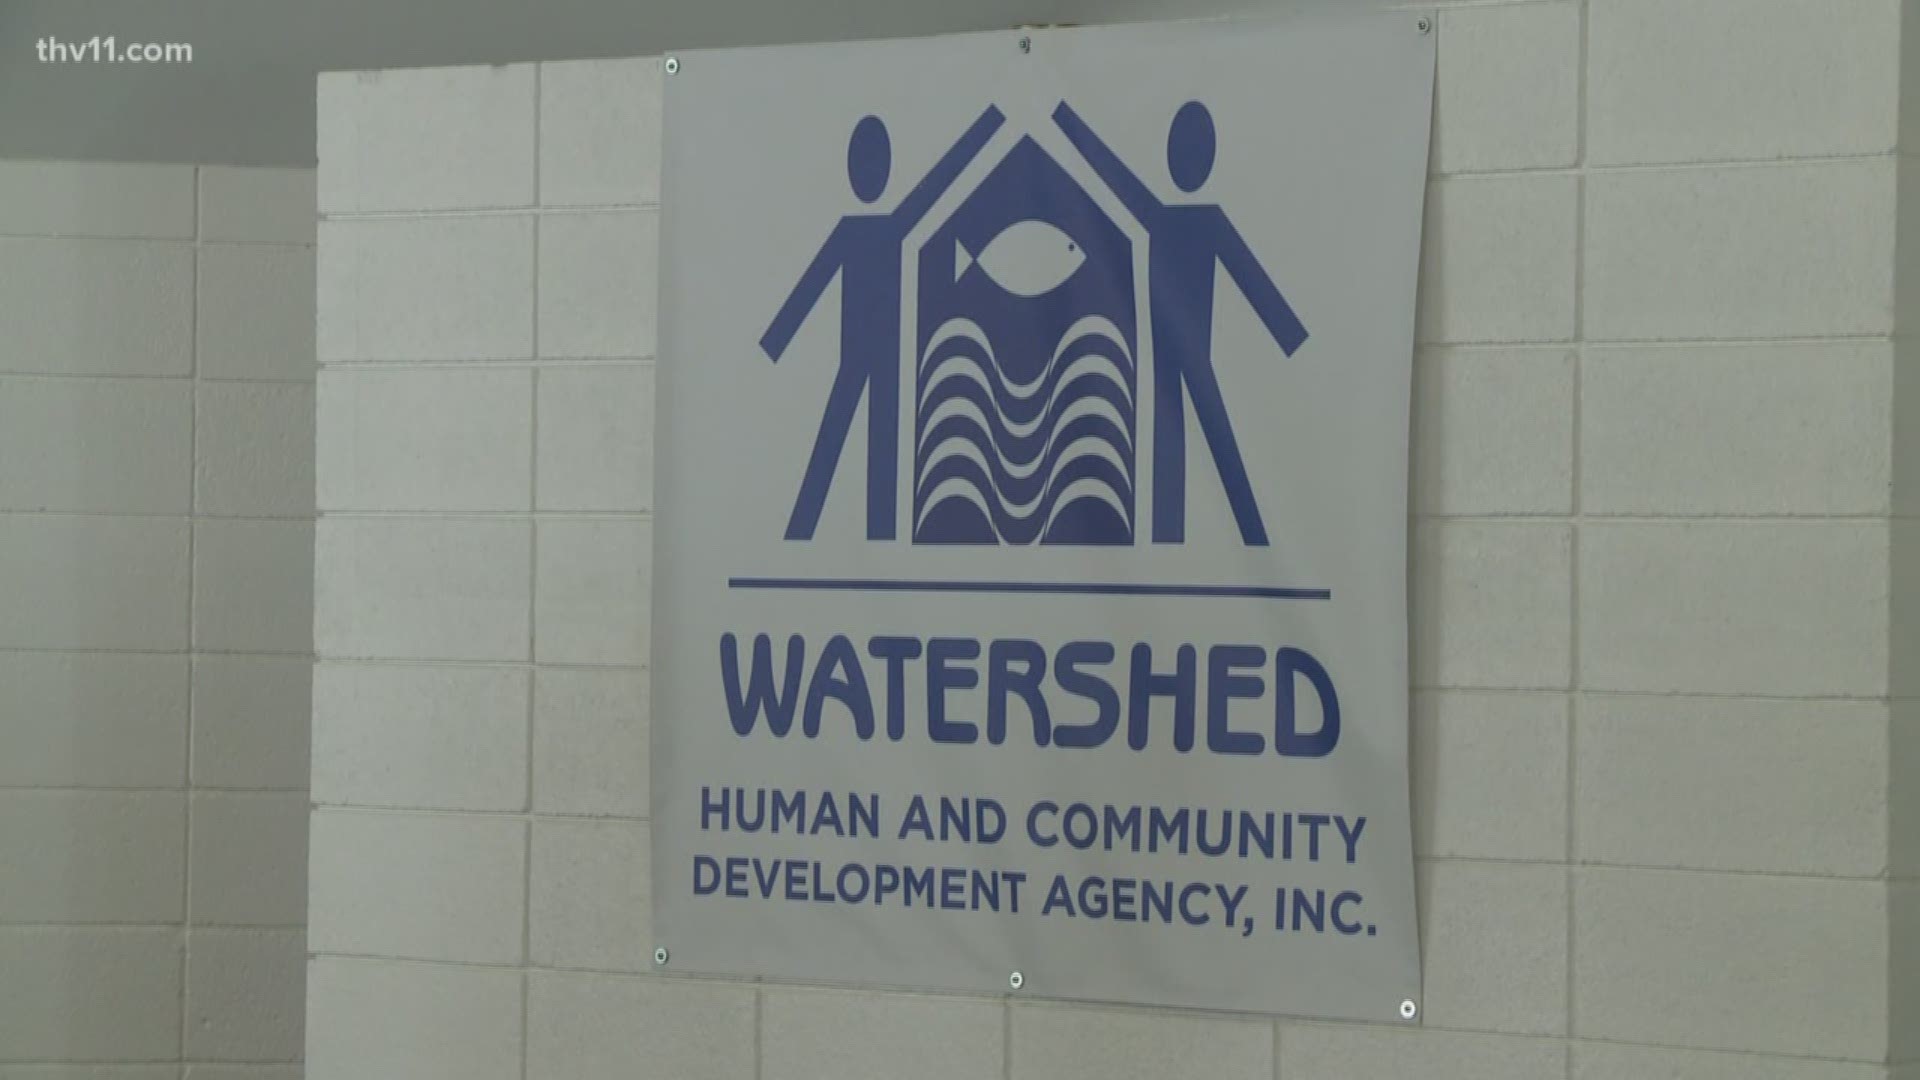 Anyone looking for a job in central Arkansas is invited to a free job fair at the Watershed in Little Rock tomorrow, July 24.